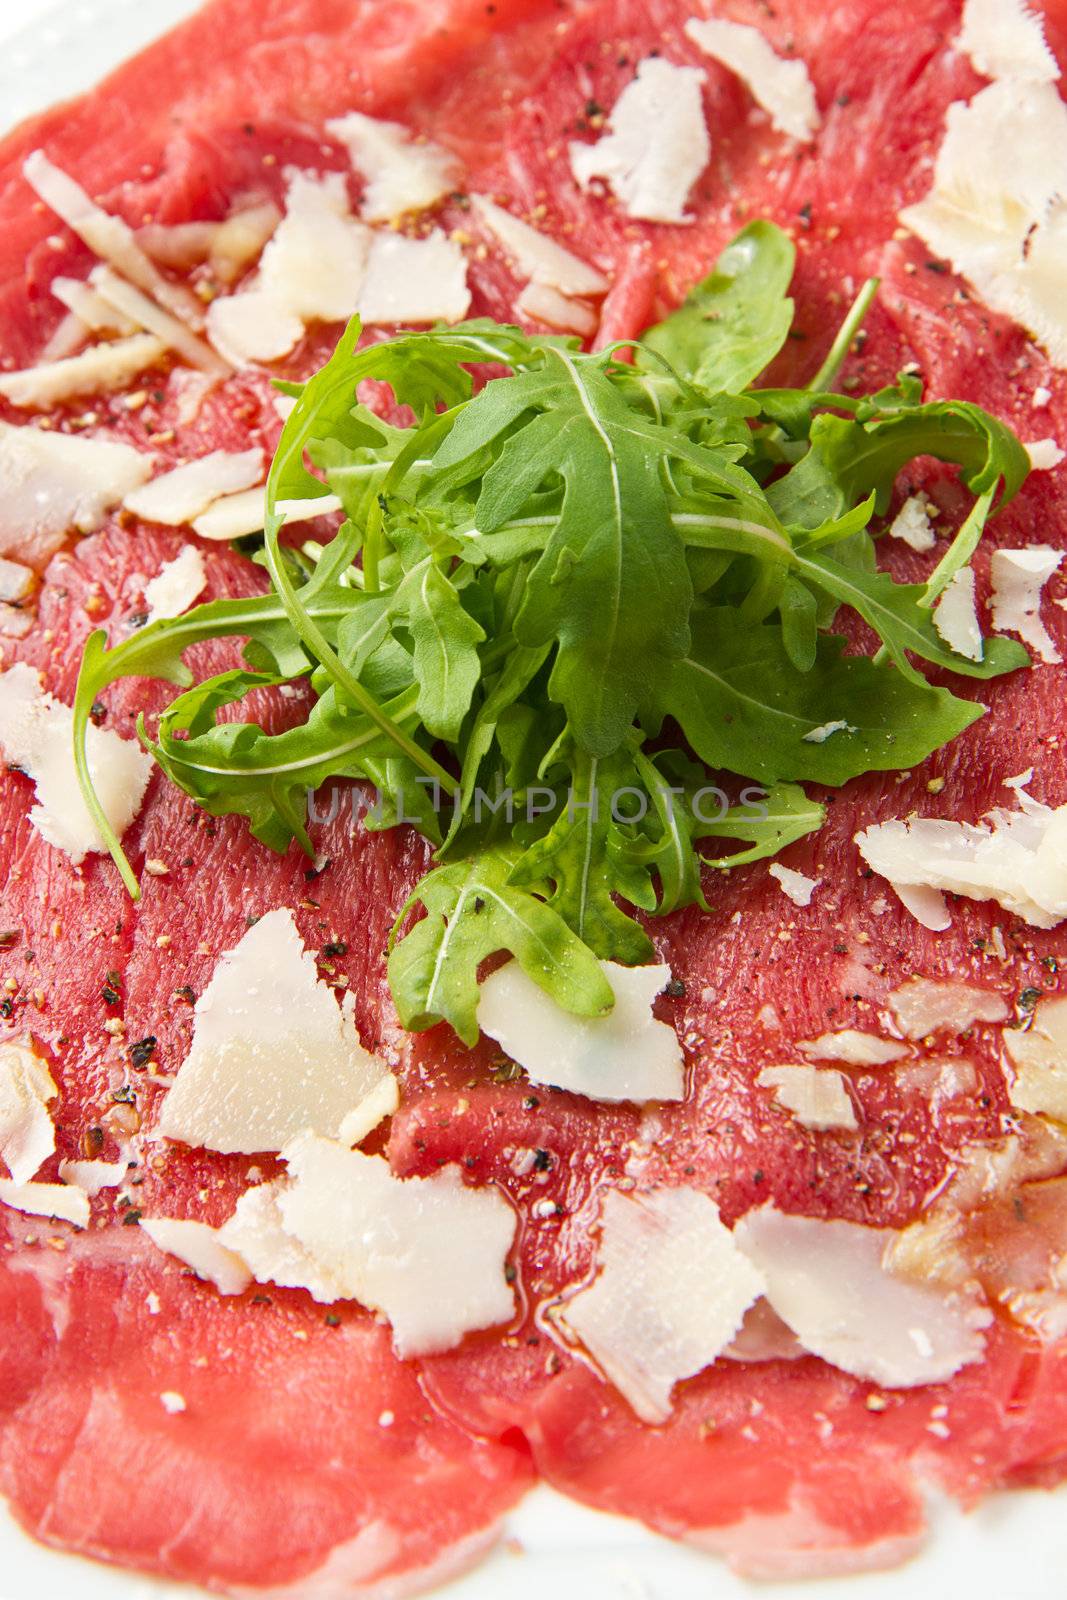 white dish with carpaccio of beef on arugula over white background